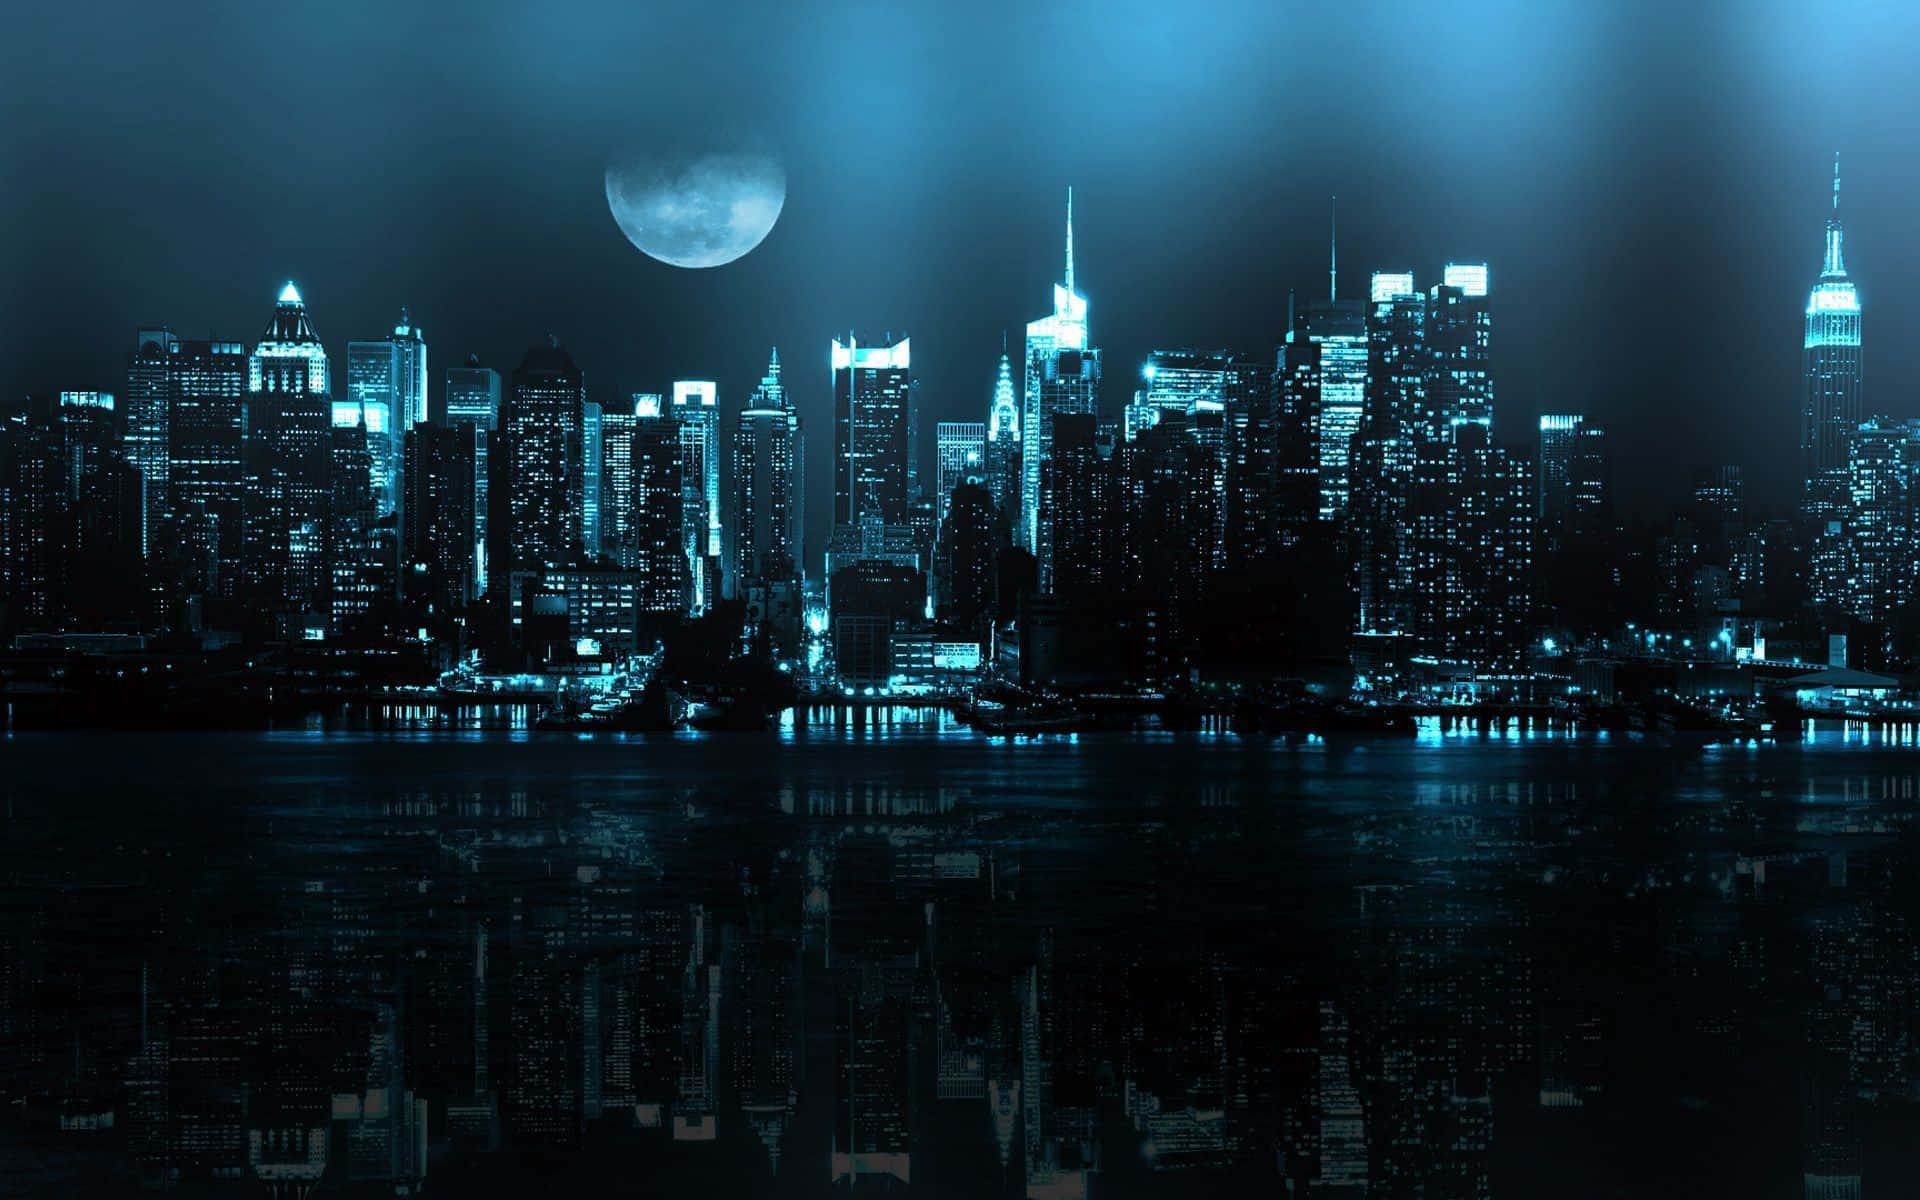 Night time setting with glittering city skyline